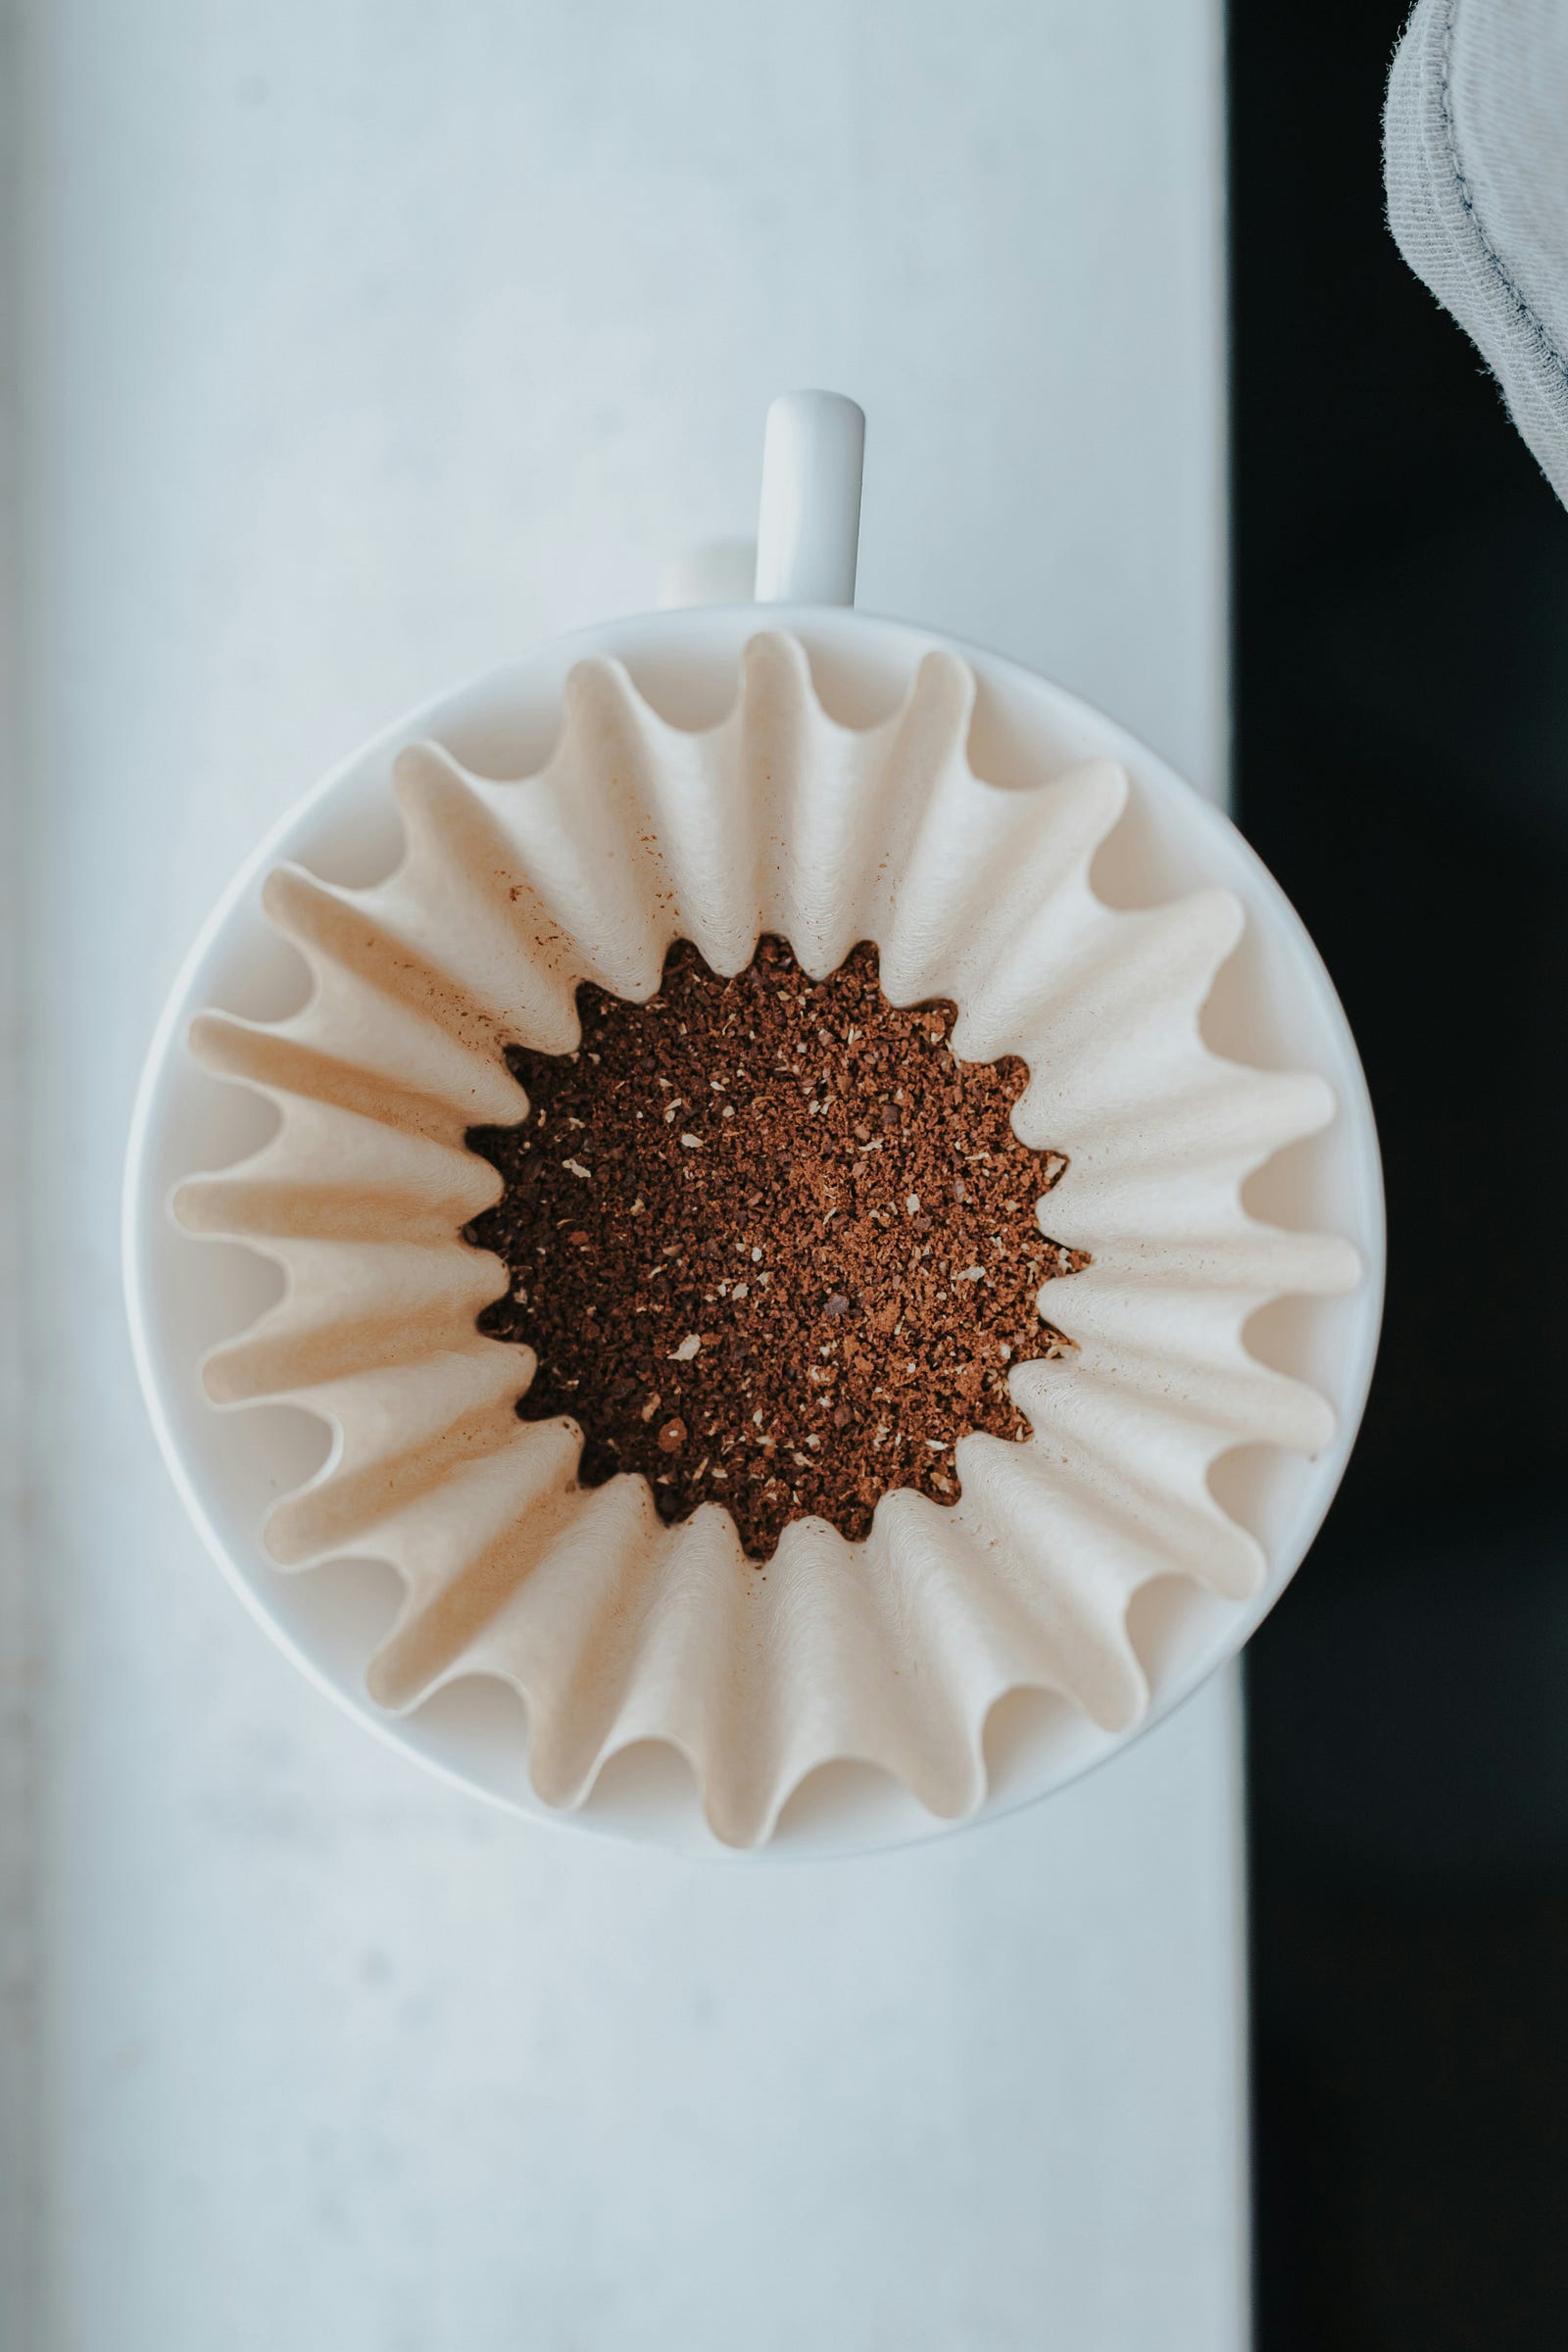 A coffee filter, as seen from above. Boiling water and then passing the fluid through a coffee filter can remove up to 90 percent of microplastics.